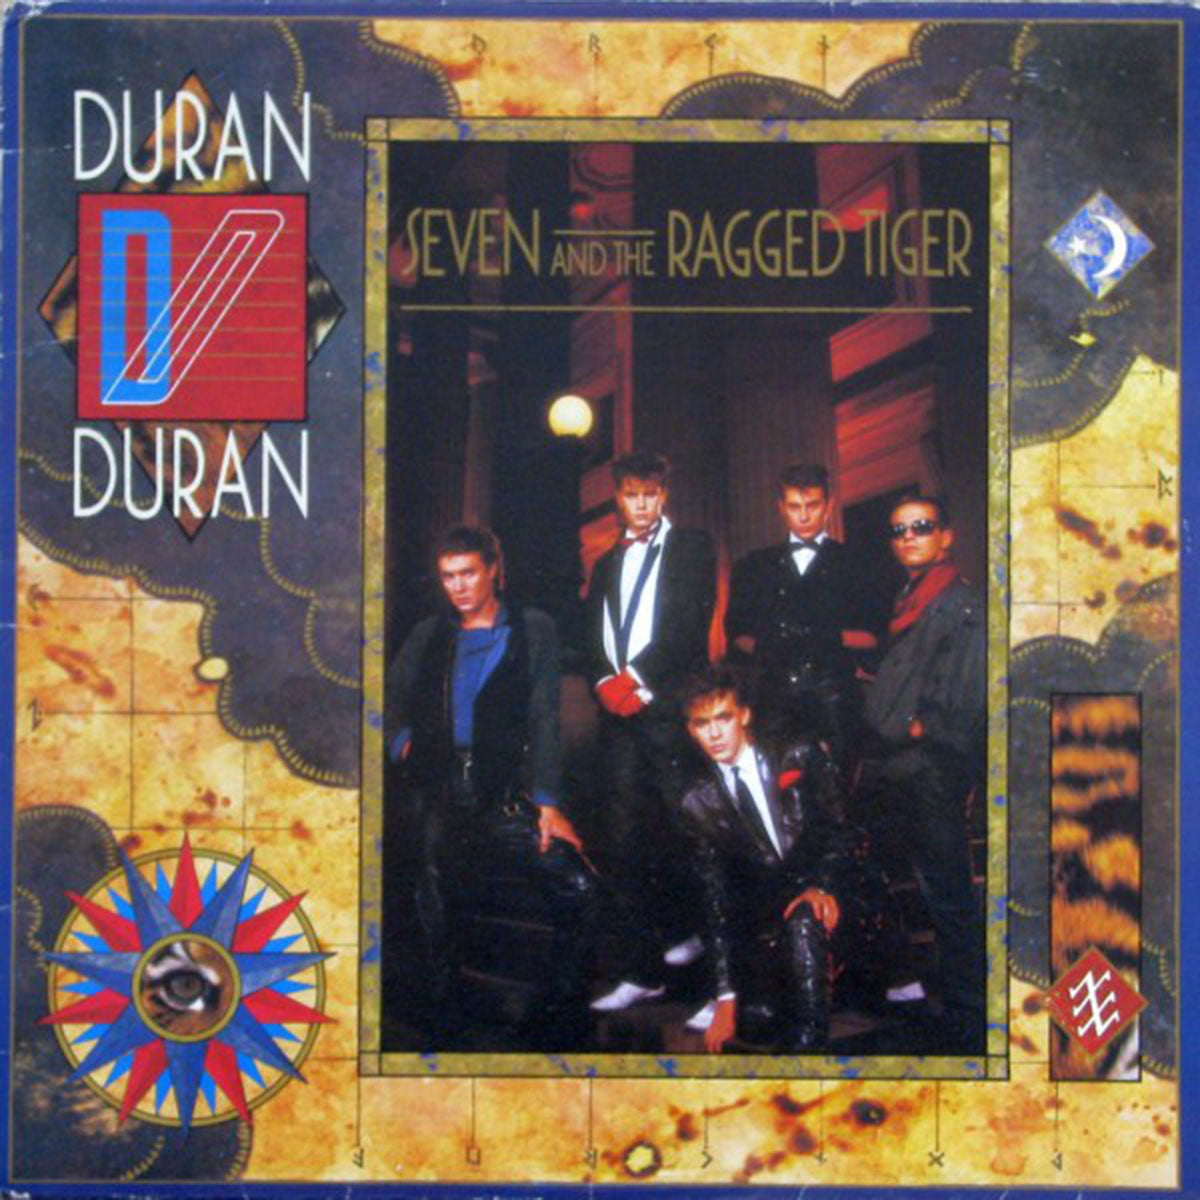 DAILY DEAL! Duran Duran – Seven And The Ragged Tiger - 1983 with Invite Card!